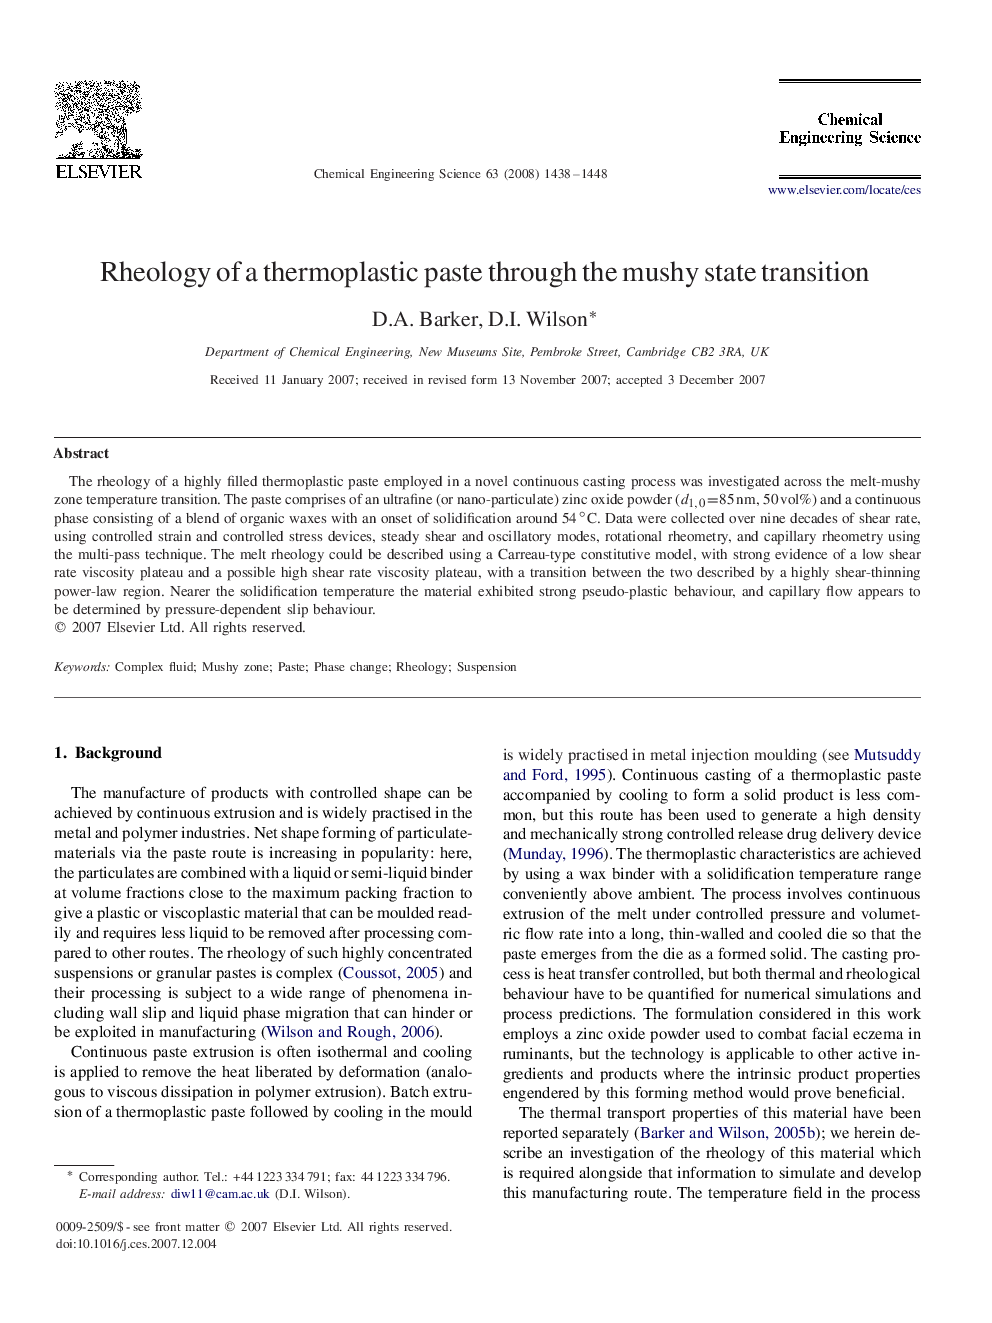 Rheology of a thermoplastic paste through the mushy state transition